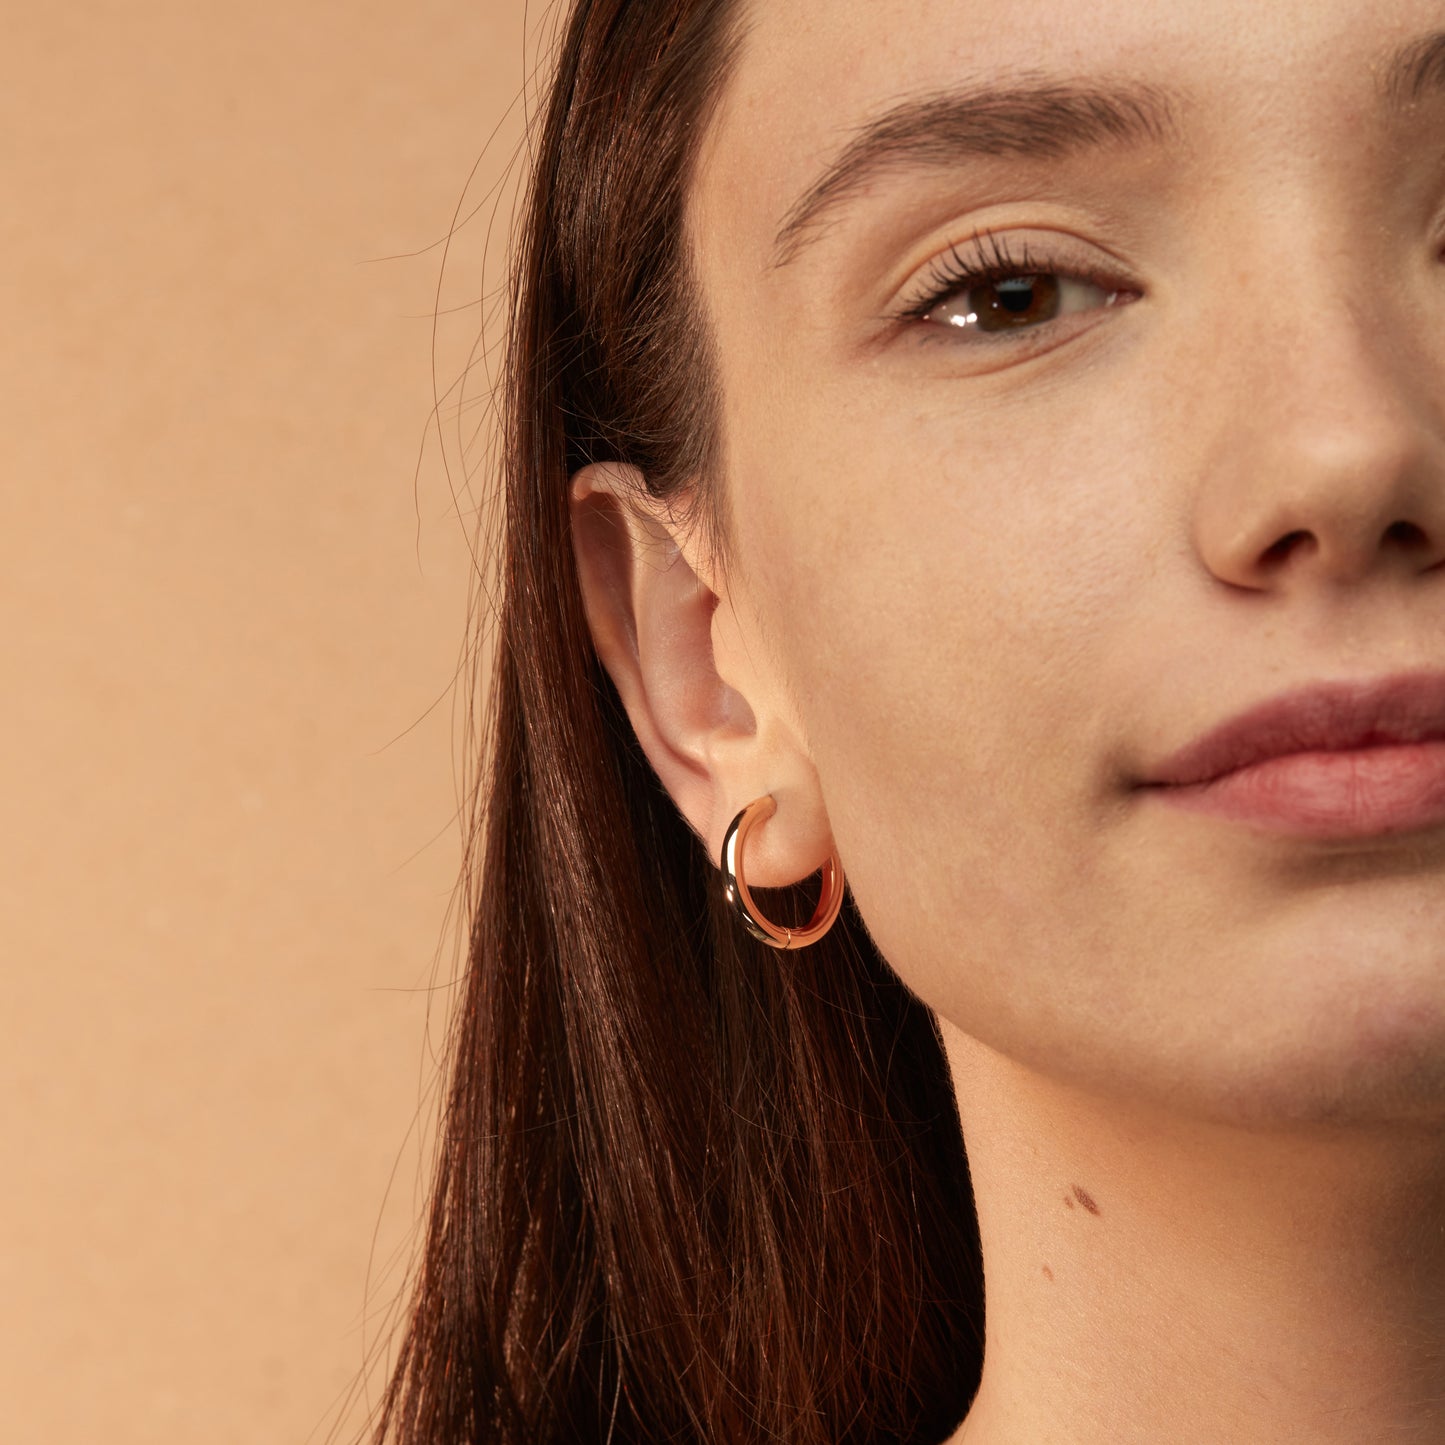 big gold earrings, rose gold hoops, classic gold hoops, polished gold hoops, real gold hoops, 14k gold hoops, solid gold hoops, solid gold earrings, gold earrings women, yellow rose white, 14k gold earrings, gold thick hoops, gold chunky hoops, 